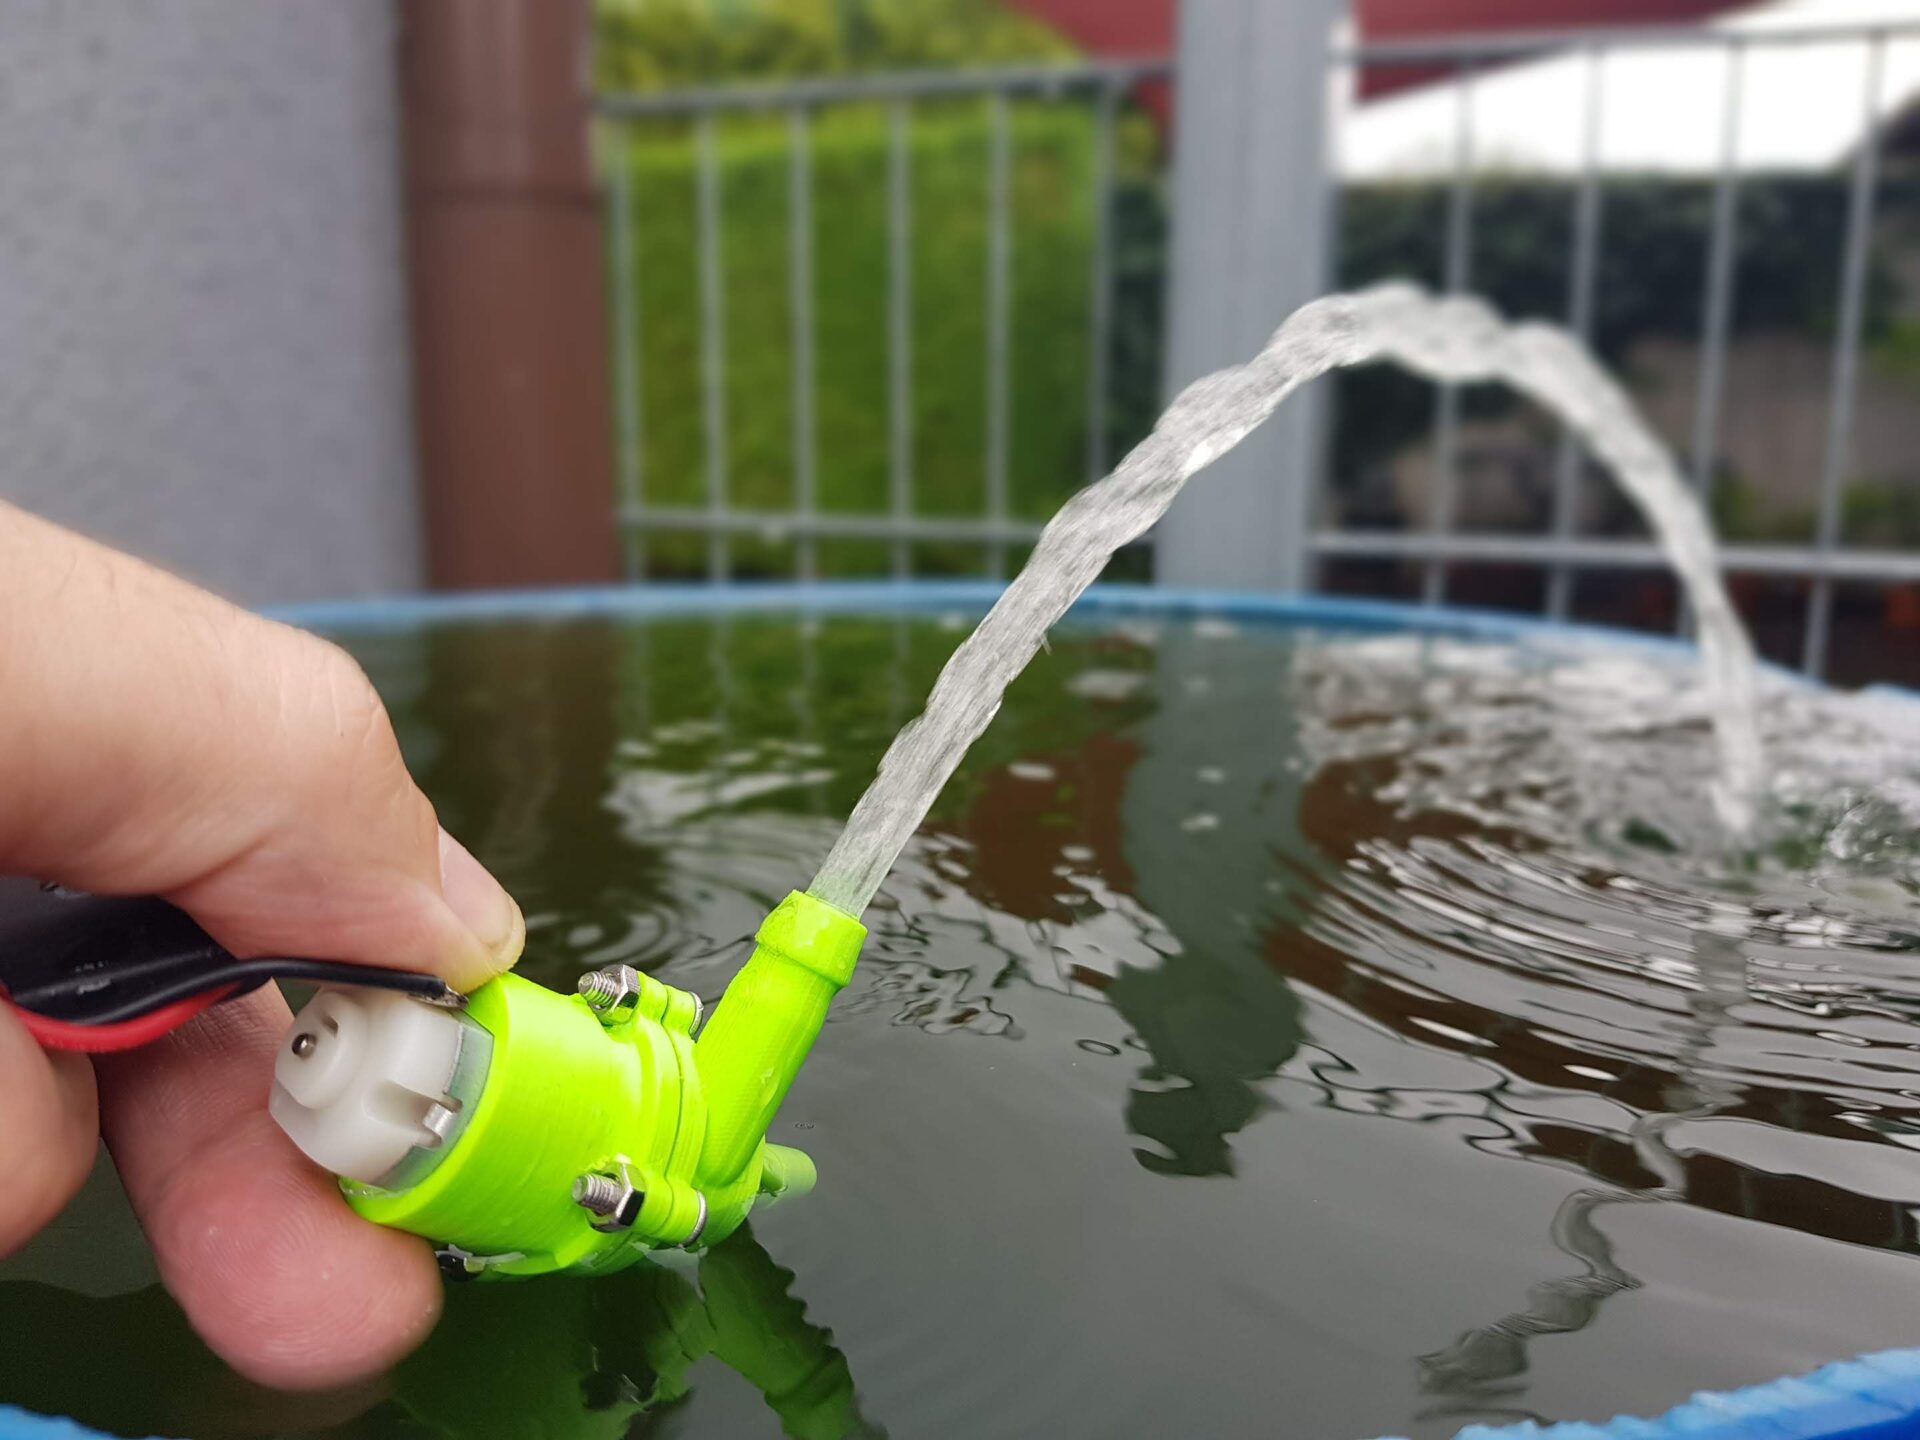 waterproofing-3d-prints-easy-to-do-techniques-pick-3d-printer